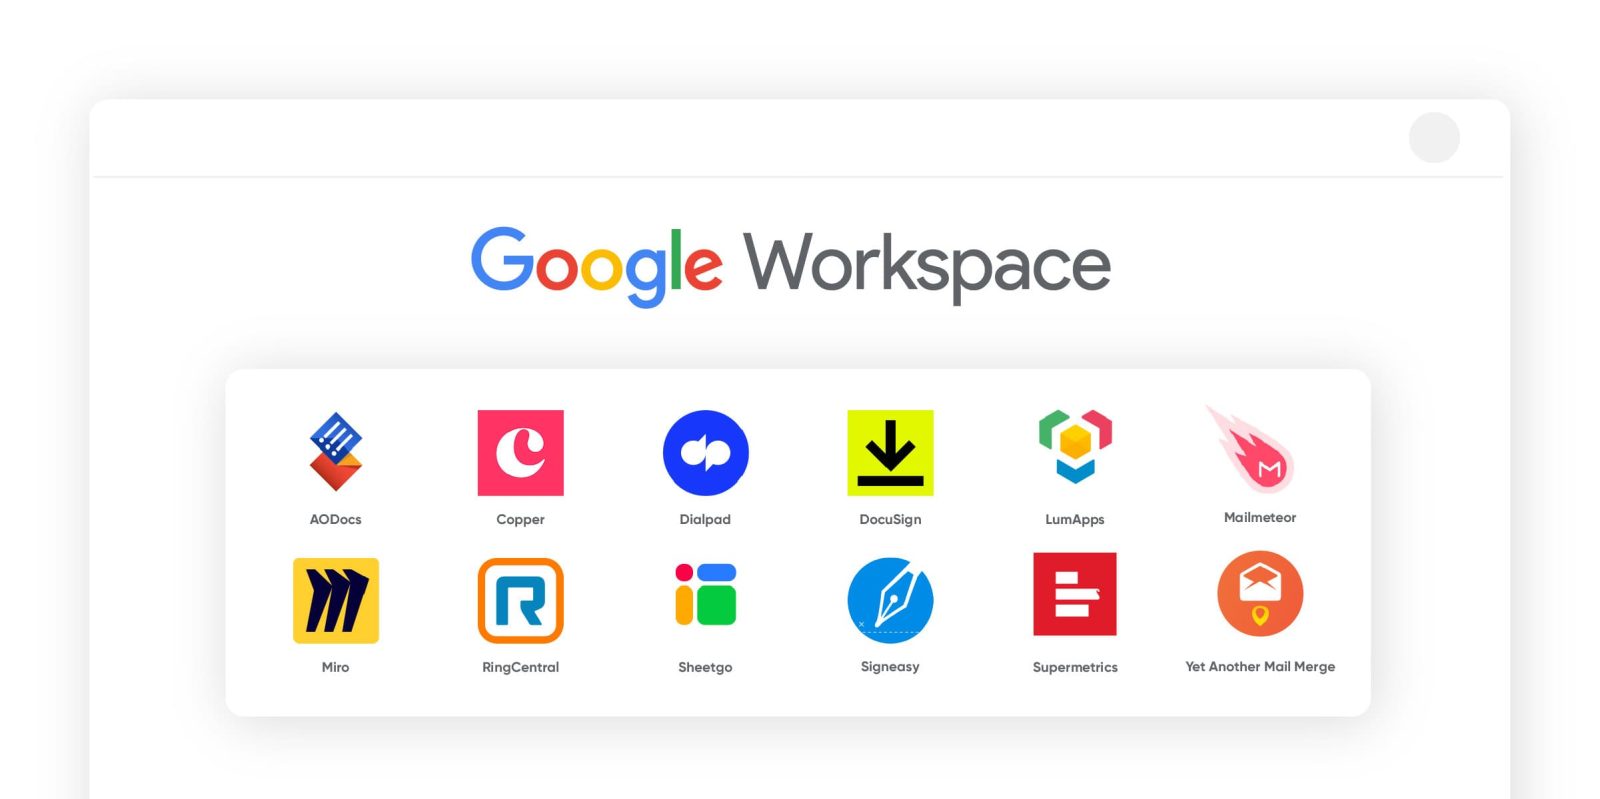 Google Workspace recommended apps